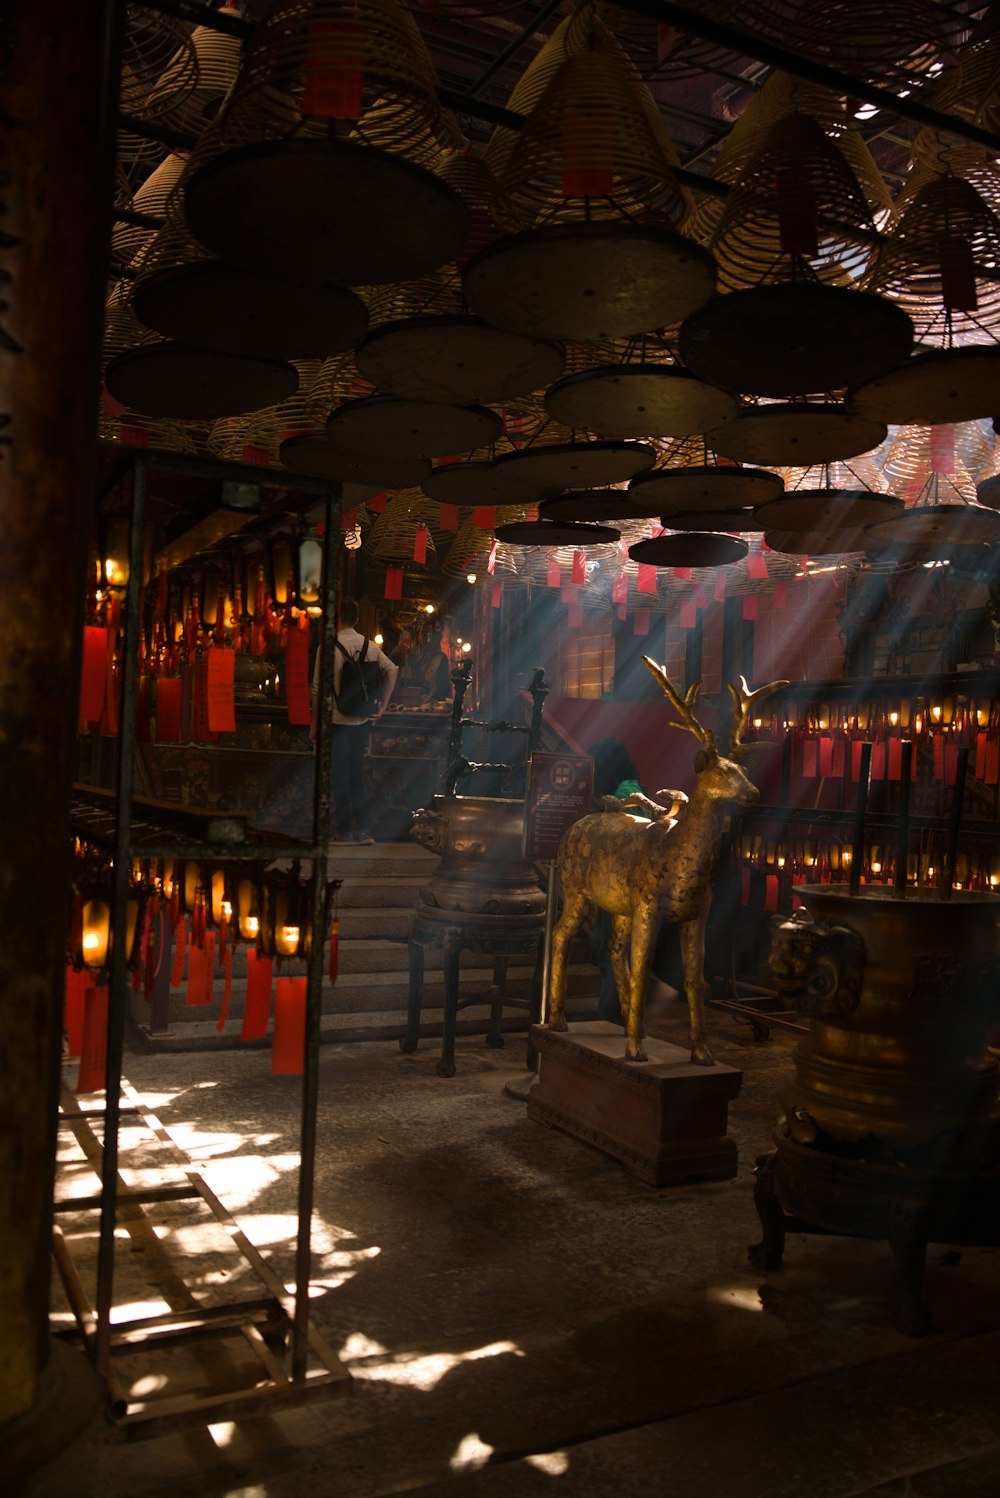 a statue of a deer in a room with many lights